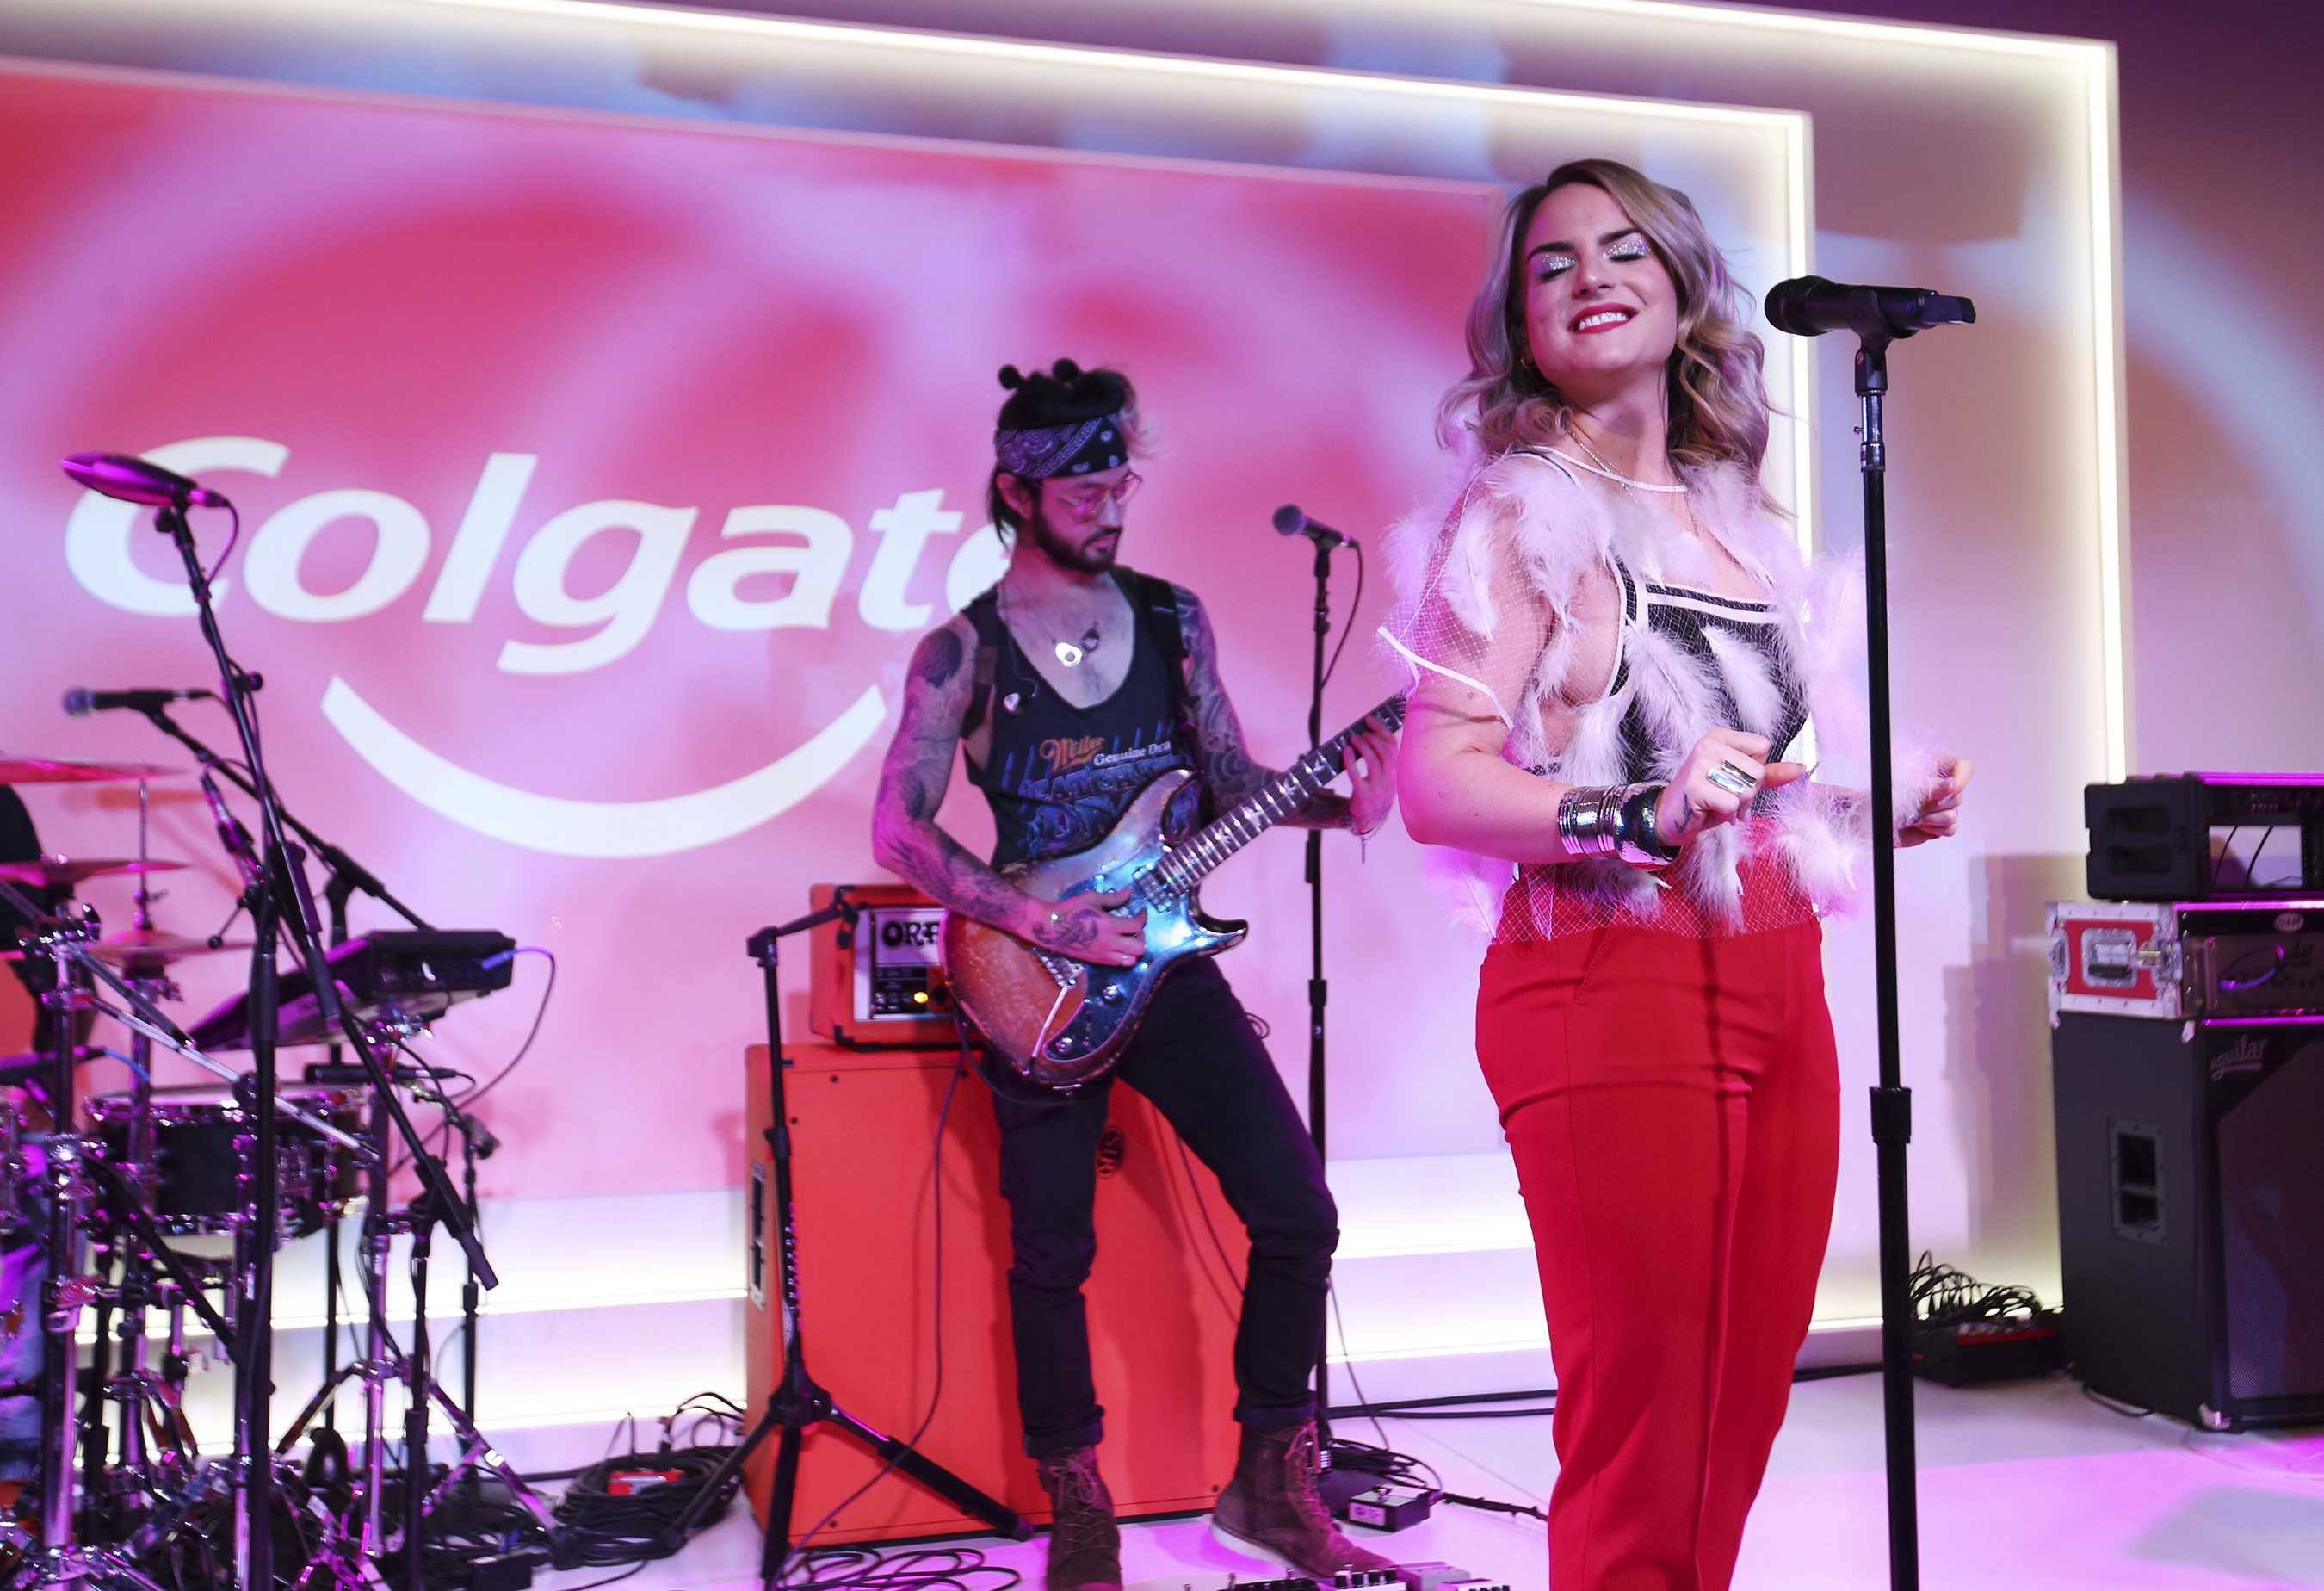 Singer JoJo performs her hit songs live at the Colgate Total(SF) Experience in celebration of the new Colgate Total(SF)